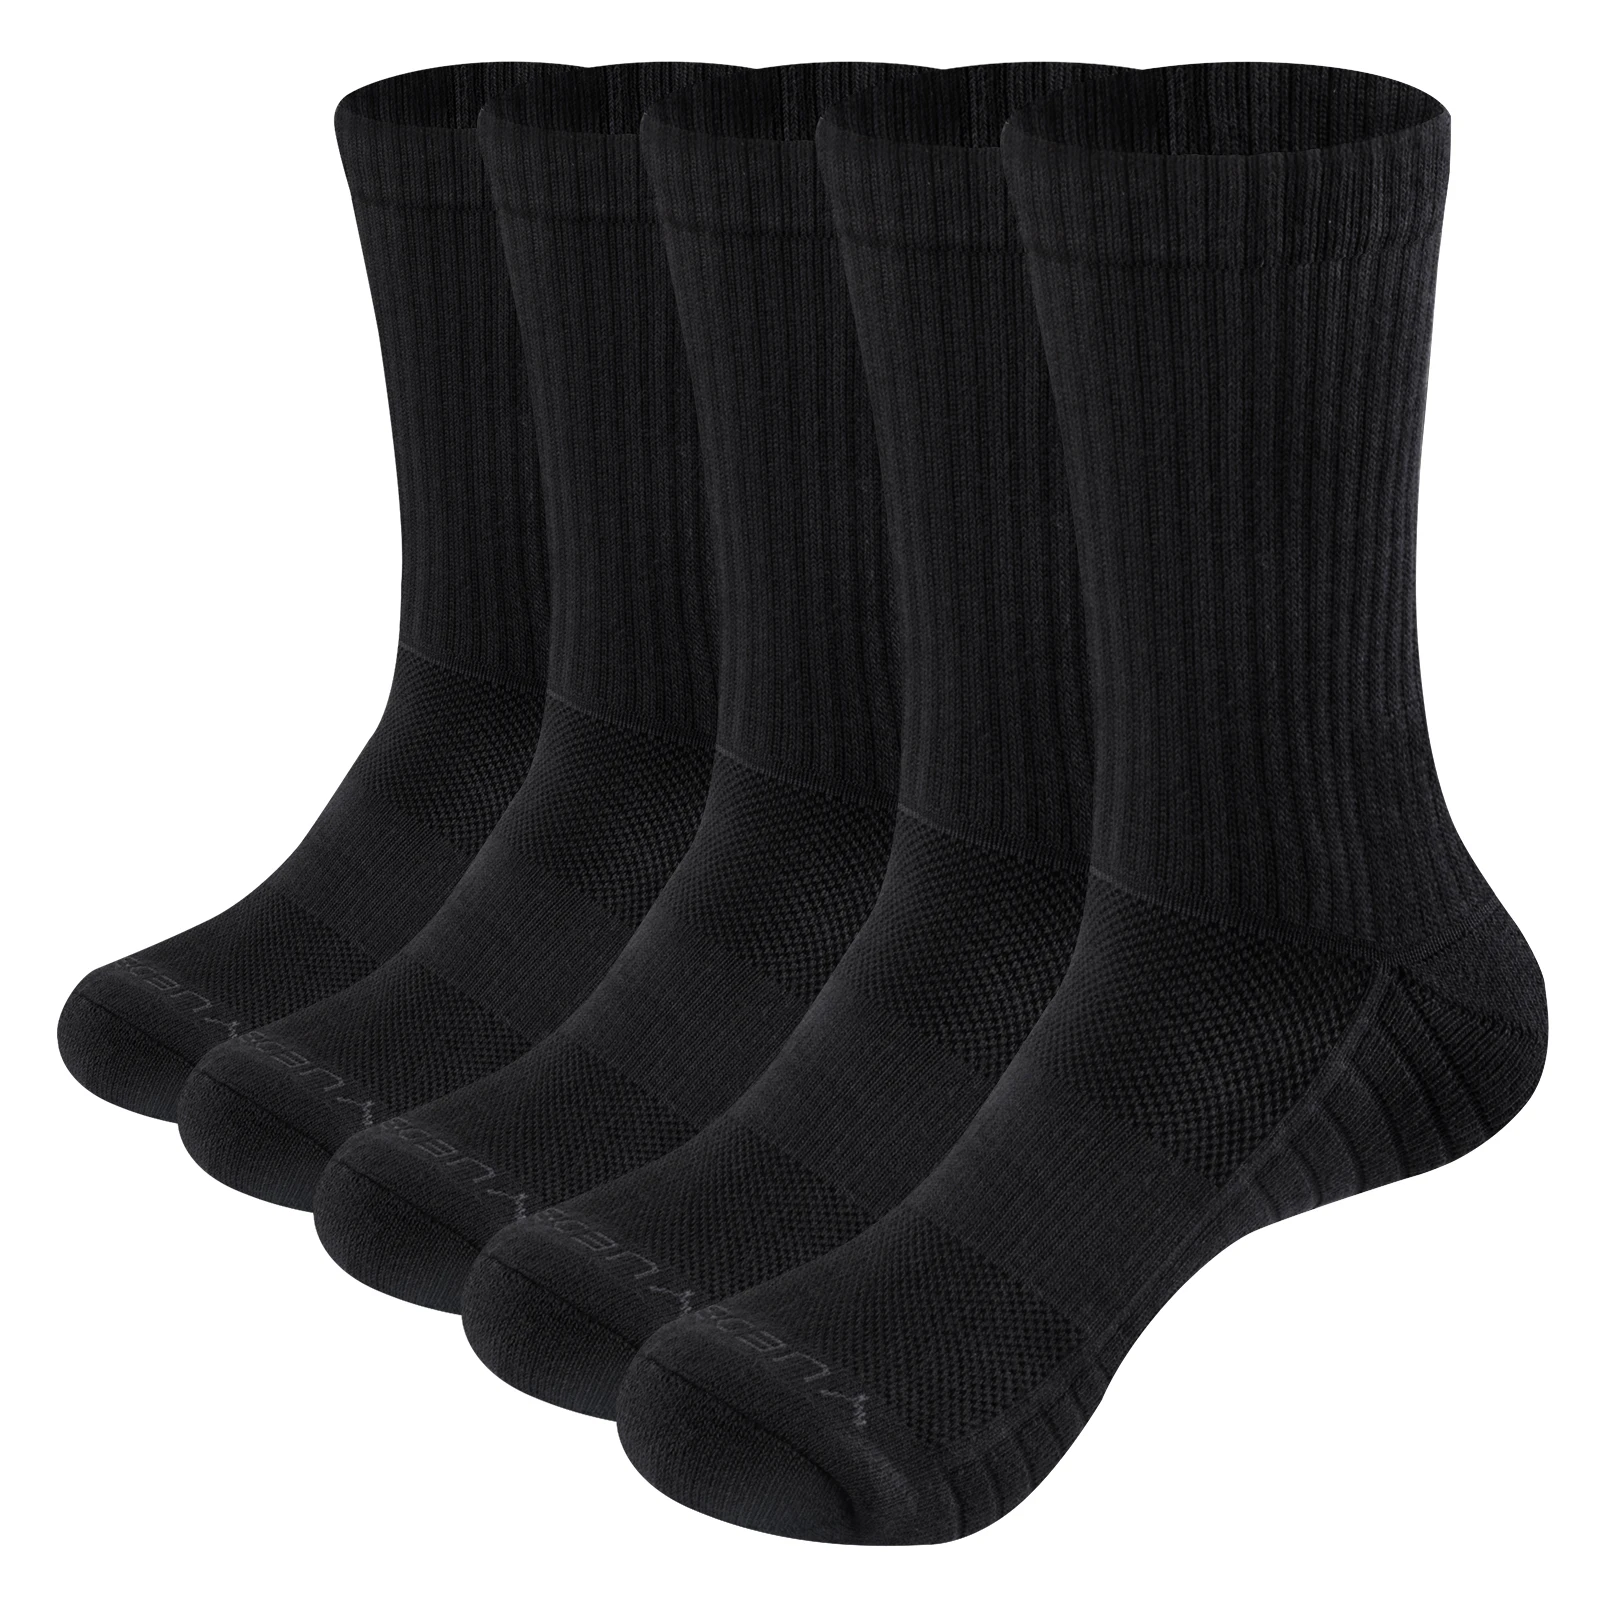 YUEDGE Mens 5 Pairs Solid Color Cotton Cushion Comfortable Sports Crew Winter Warm Thick Work Socks Black Grey White